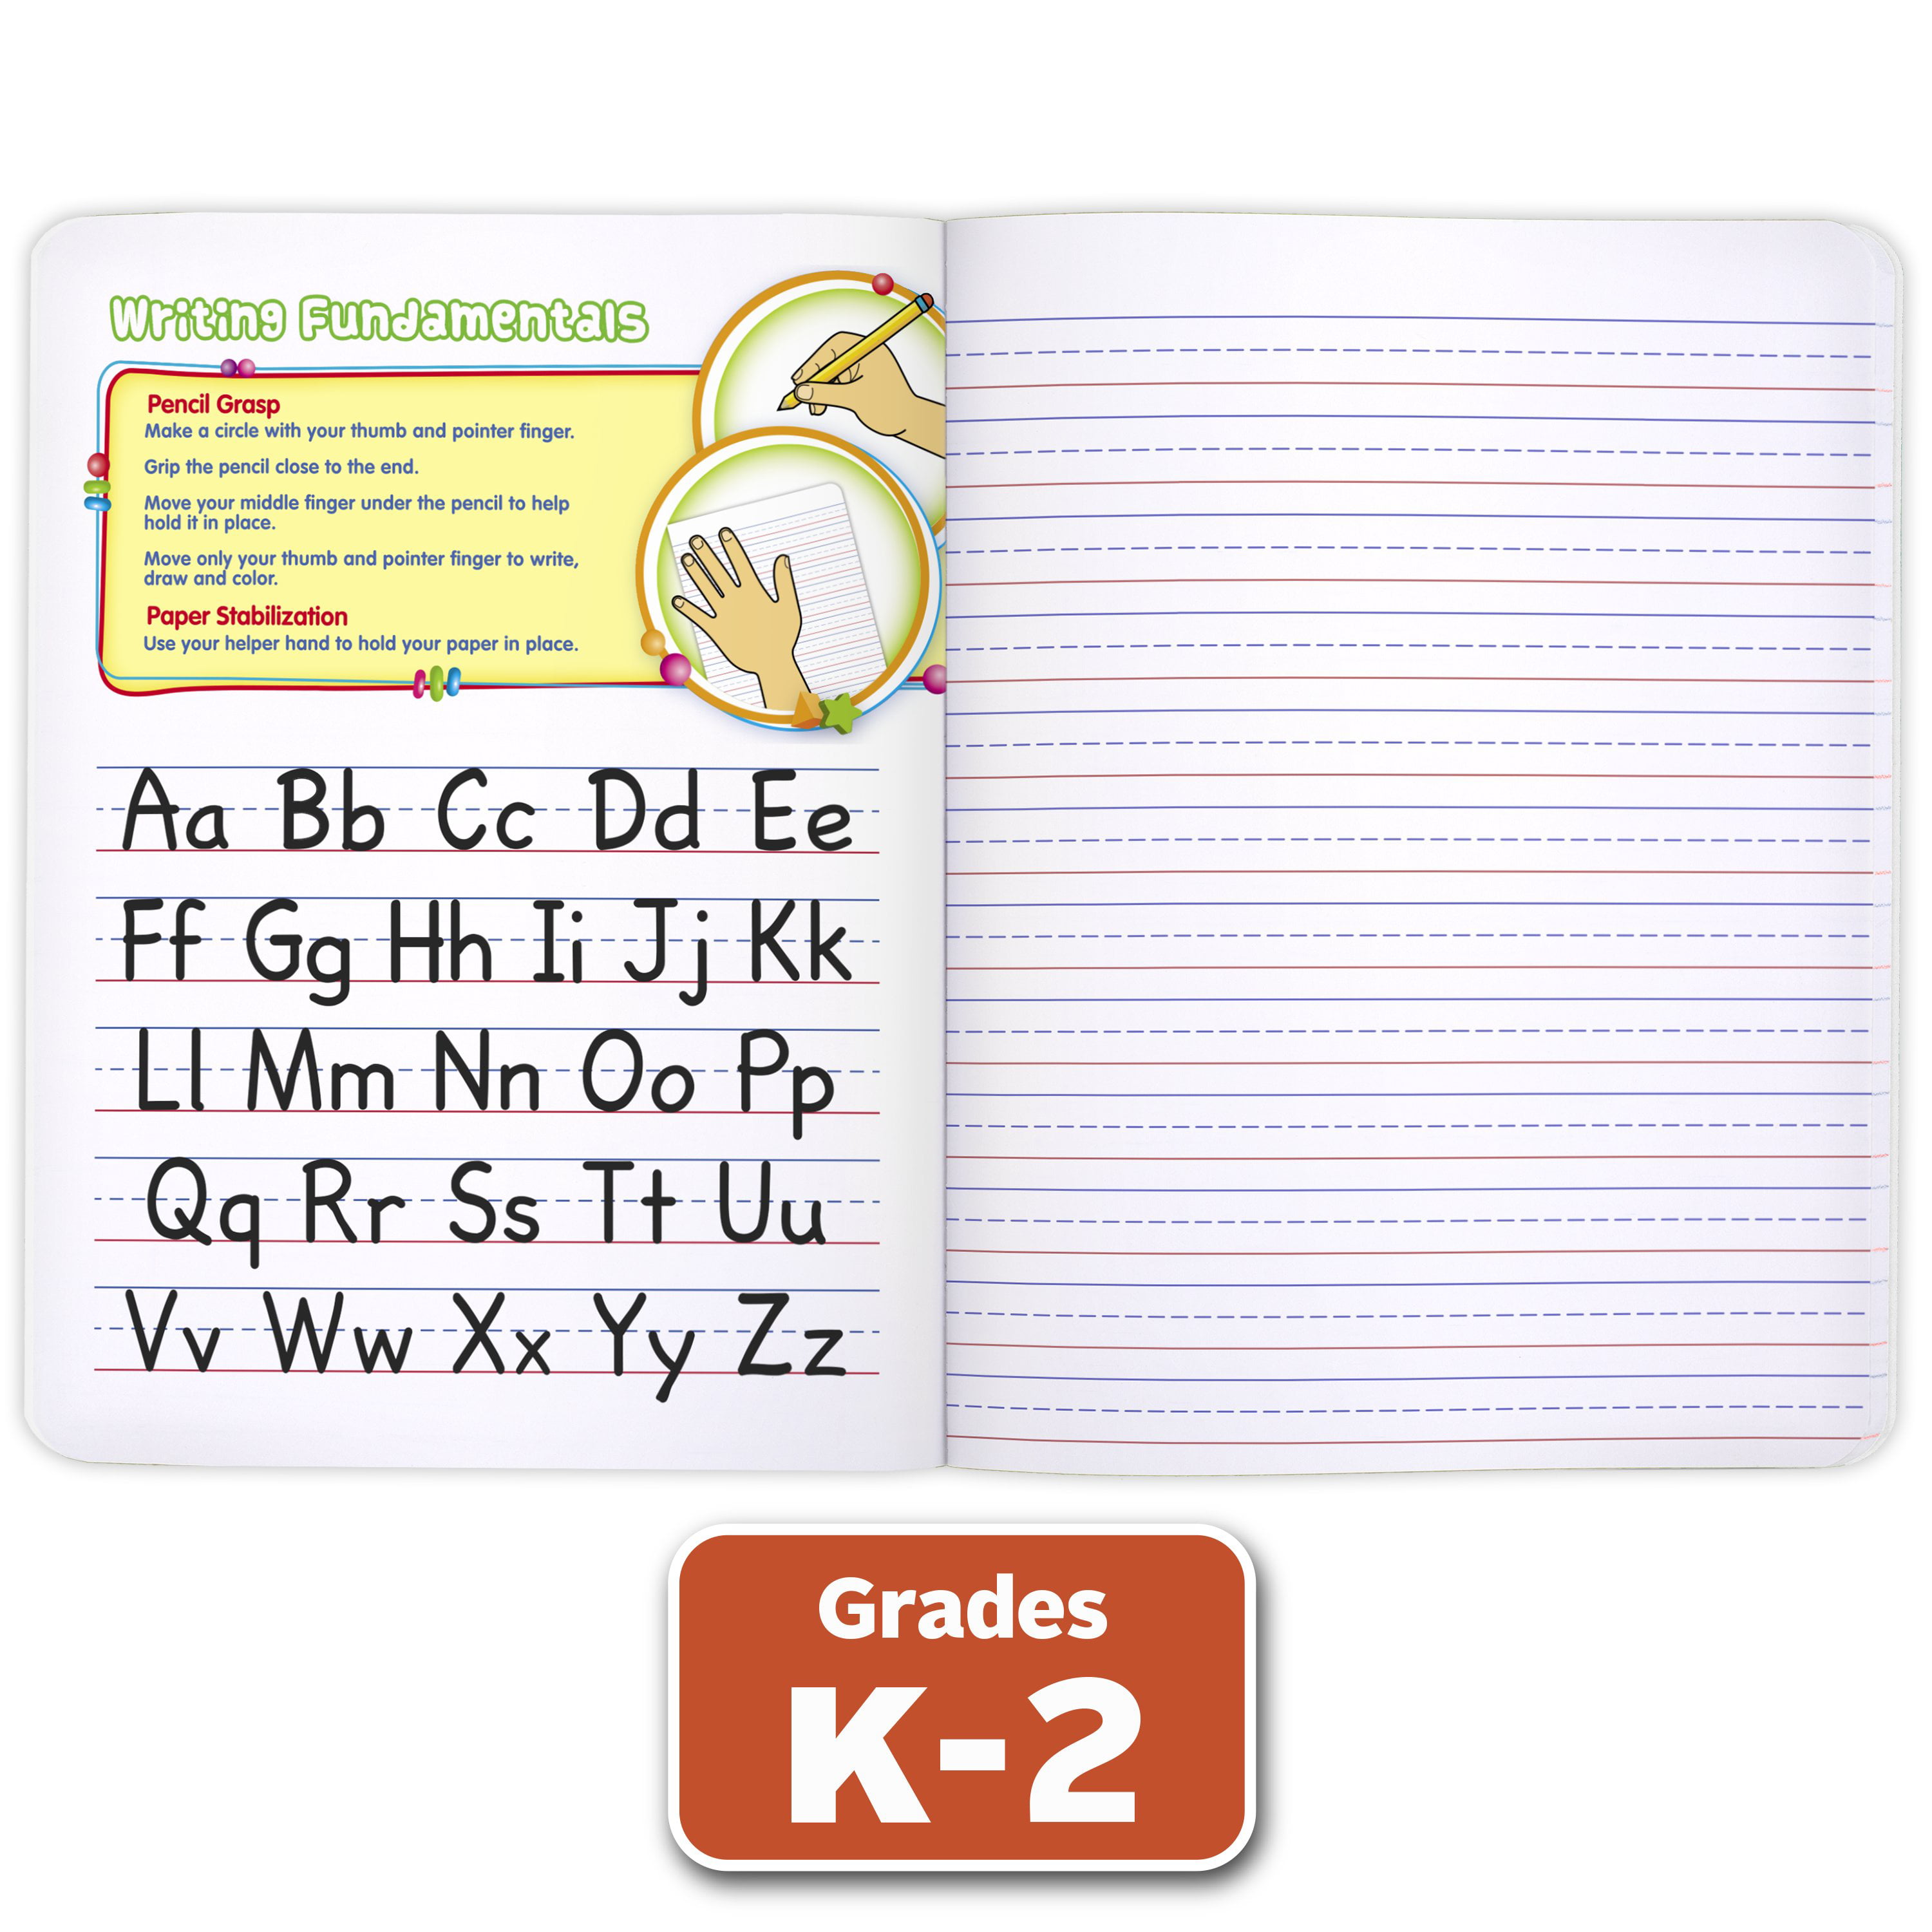 Mead MEA09956 Primary Journal K-2nd Grade